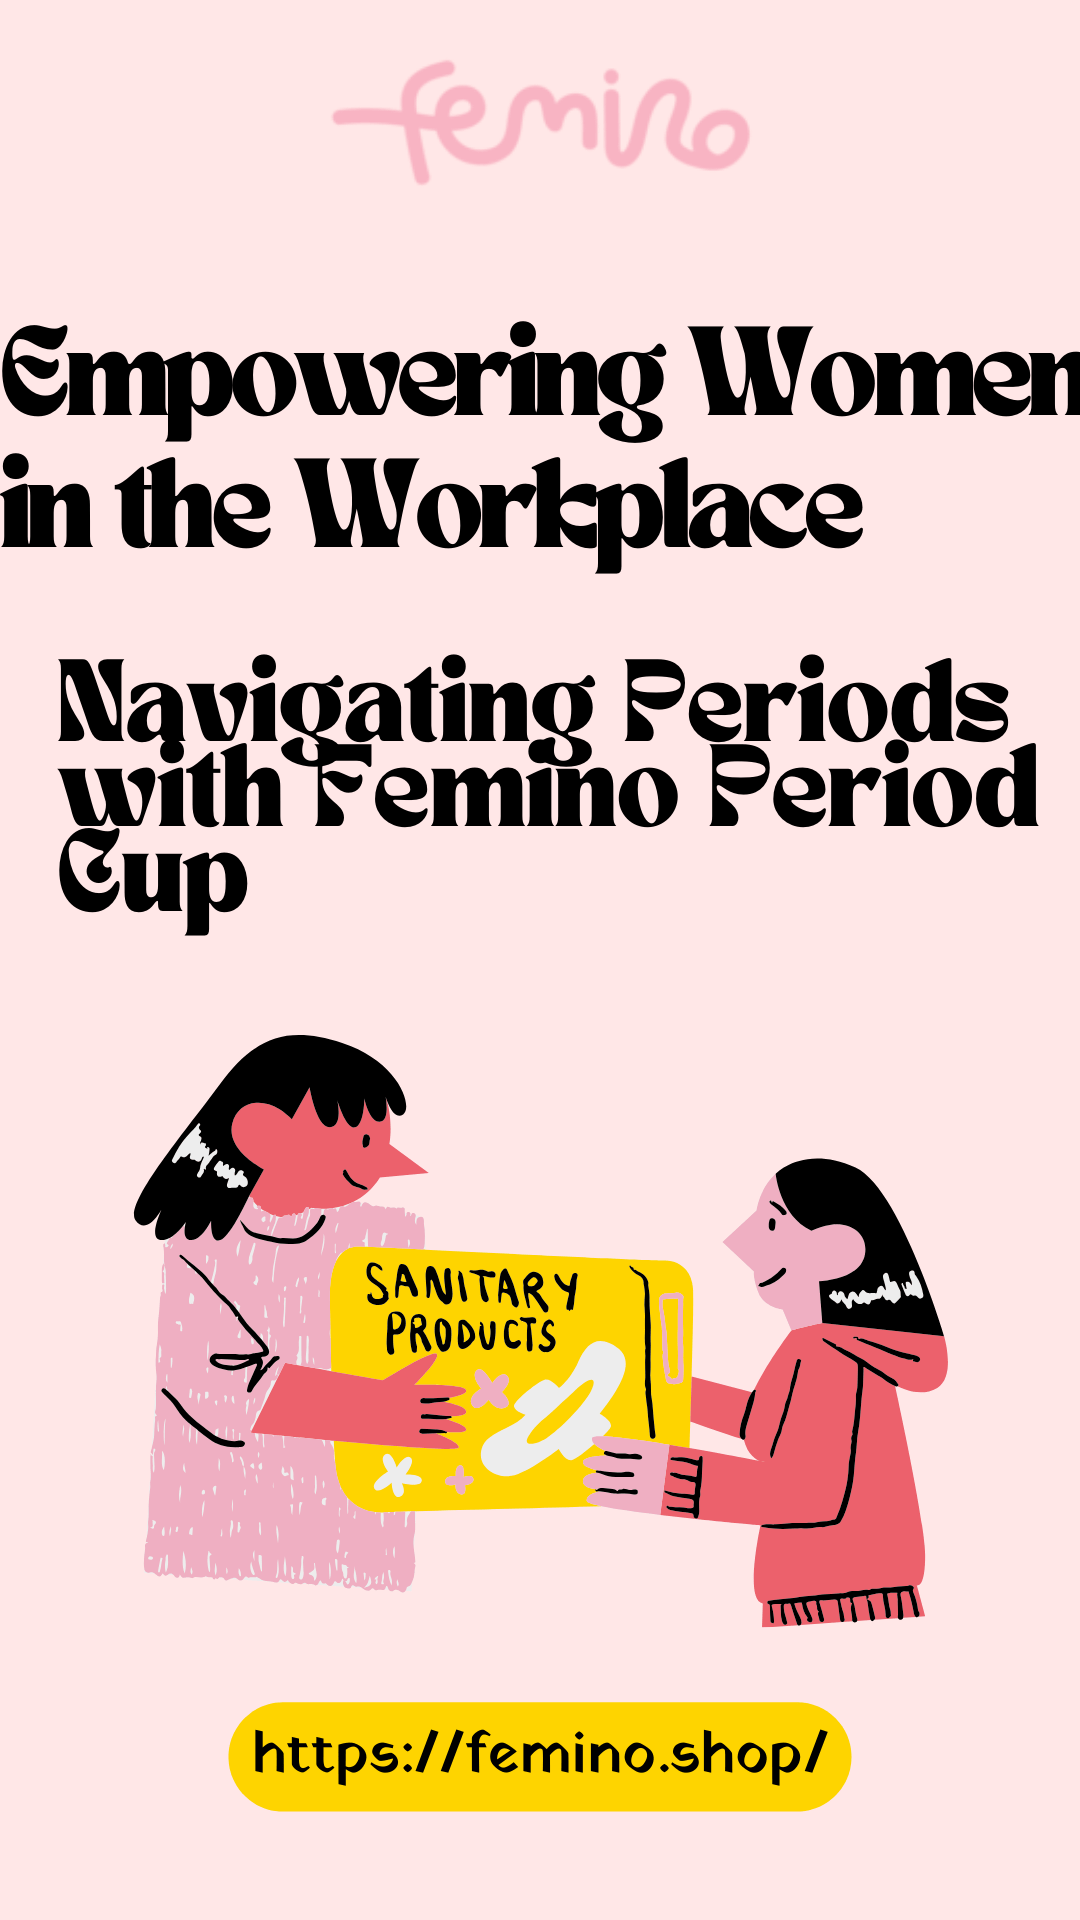 Empowering Women in the Workplace: Navigating Periods with Femino Period Cup